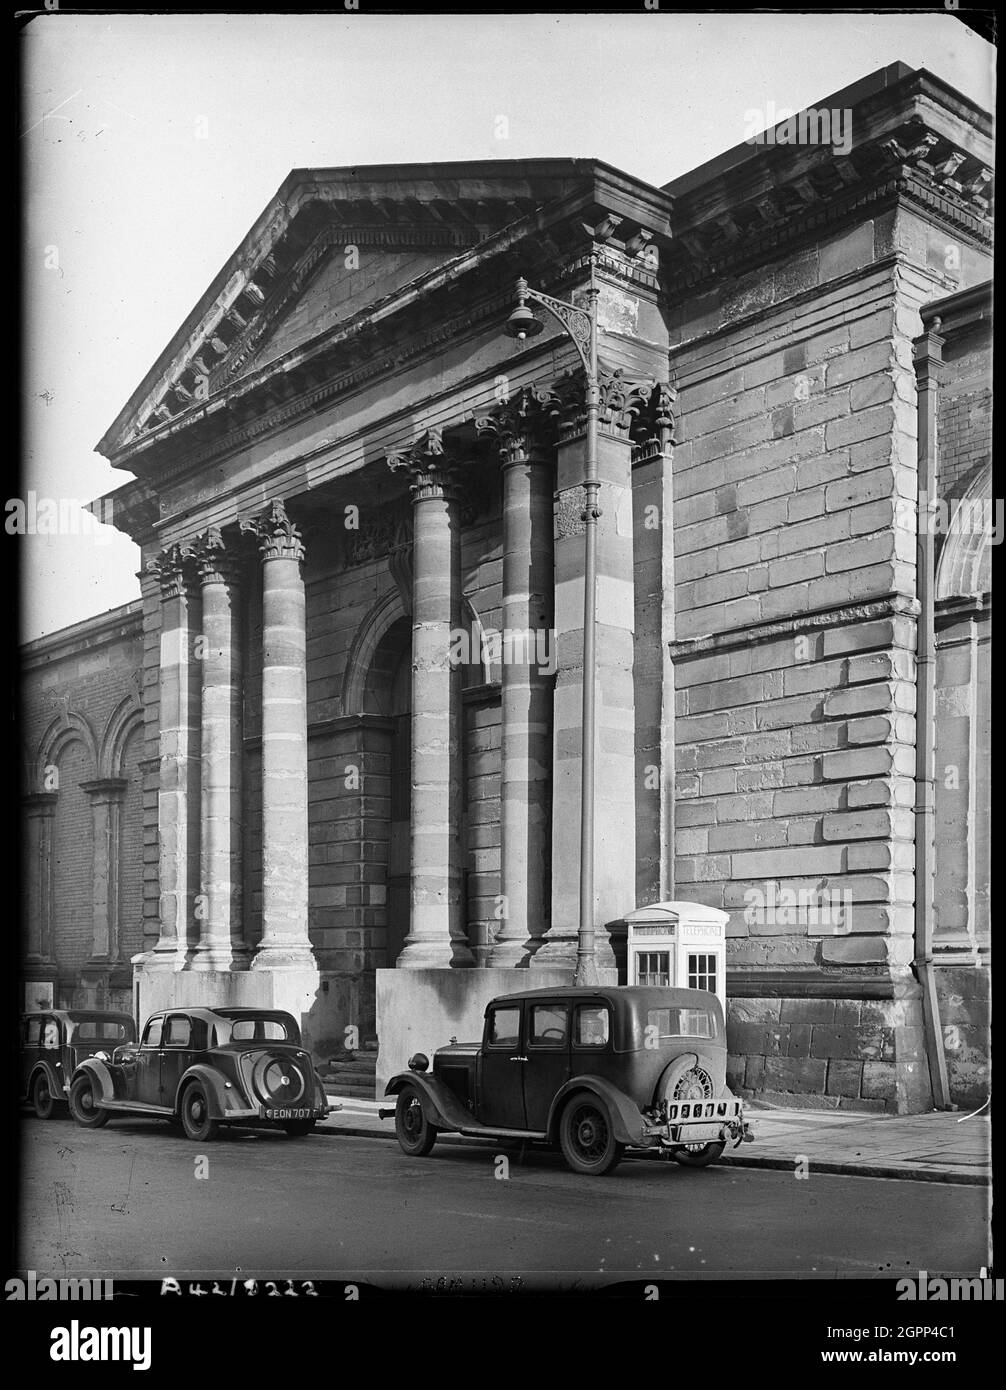 Market Hall, North Street, Wolverhampton, Spring 1942. The west portico of the Market Hall in North Street. The Market Hall opened in 1853. By 1868 it was described as 'being the worst conducted market hall in England' with stall holders complaining of a lack of enforcement of bye laws and a prevalence of pick-pockets. Over the subsequent years the situation improved, thanks in part to the presence of police officers, and the market went from strength to strength. It finally closed in 1960 after concerns that repairs would prove too costly. The Civic Centre now occupies the site. Stock Photo